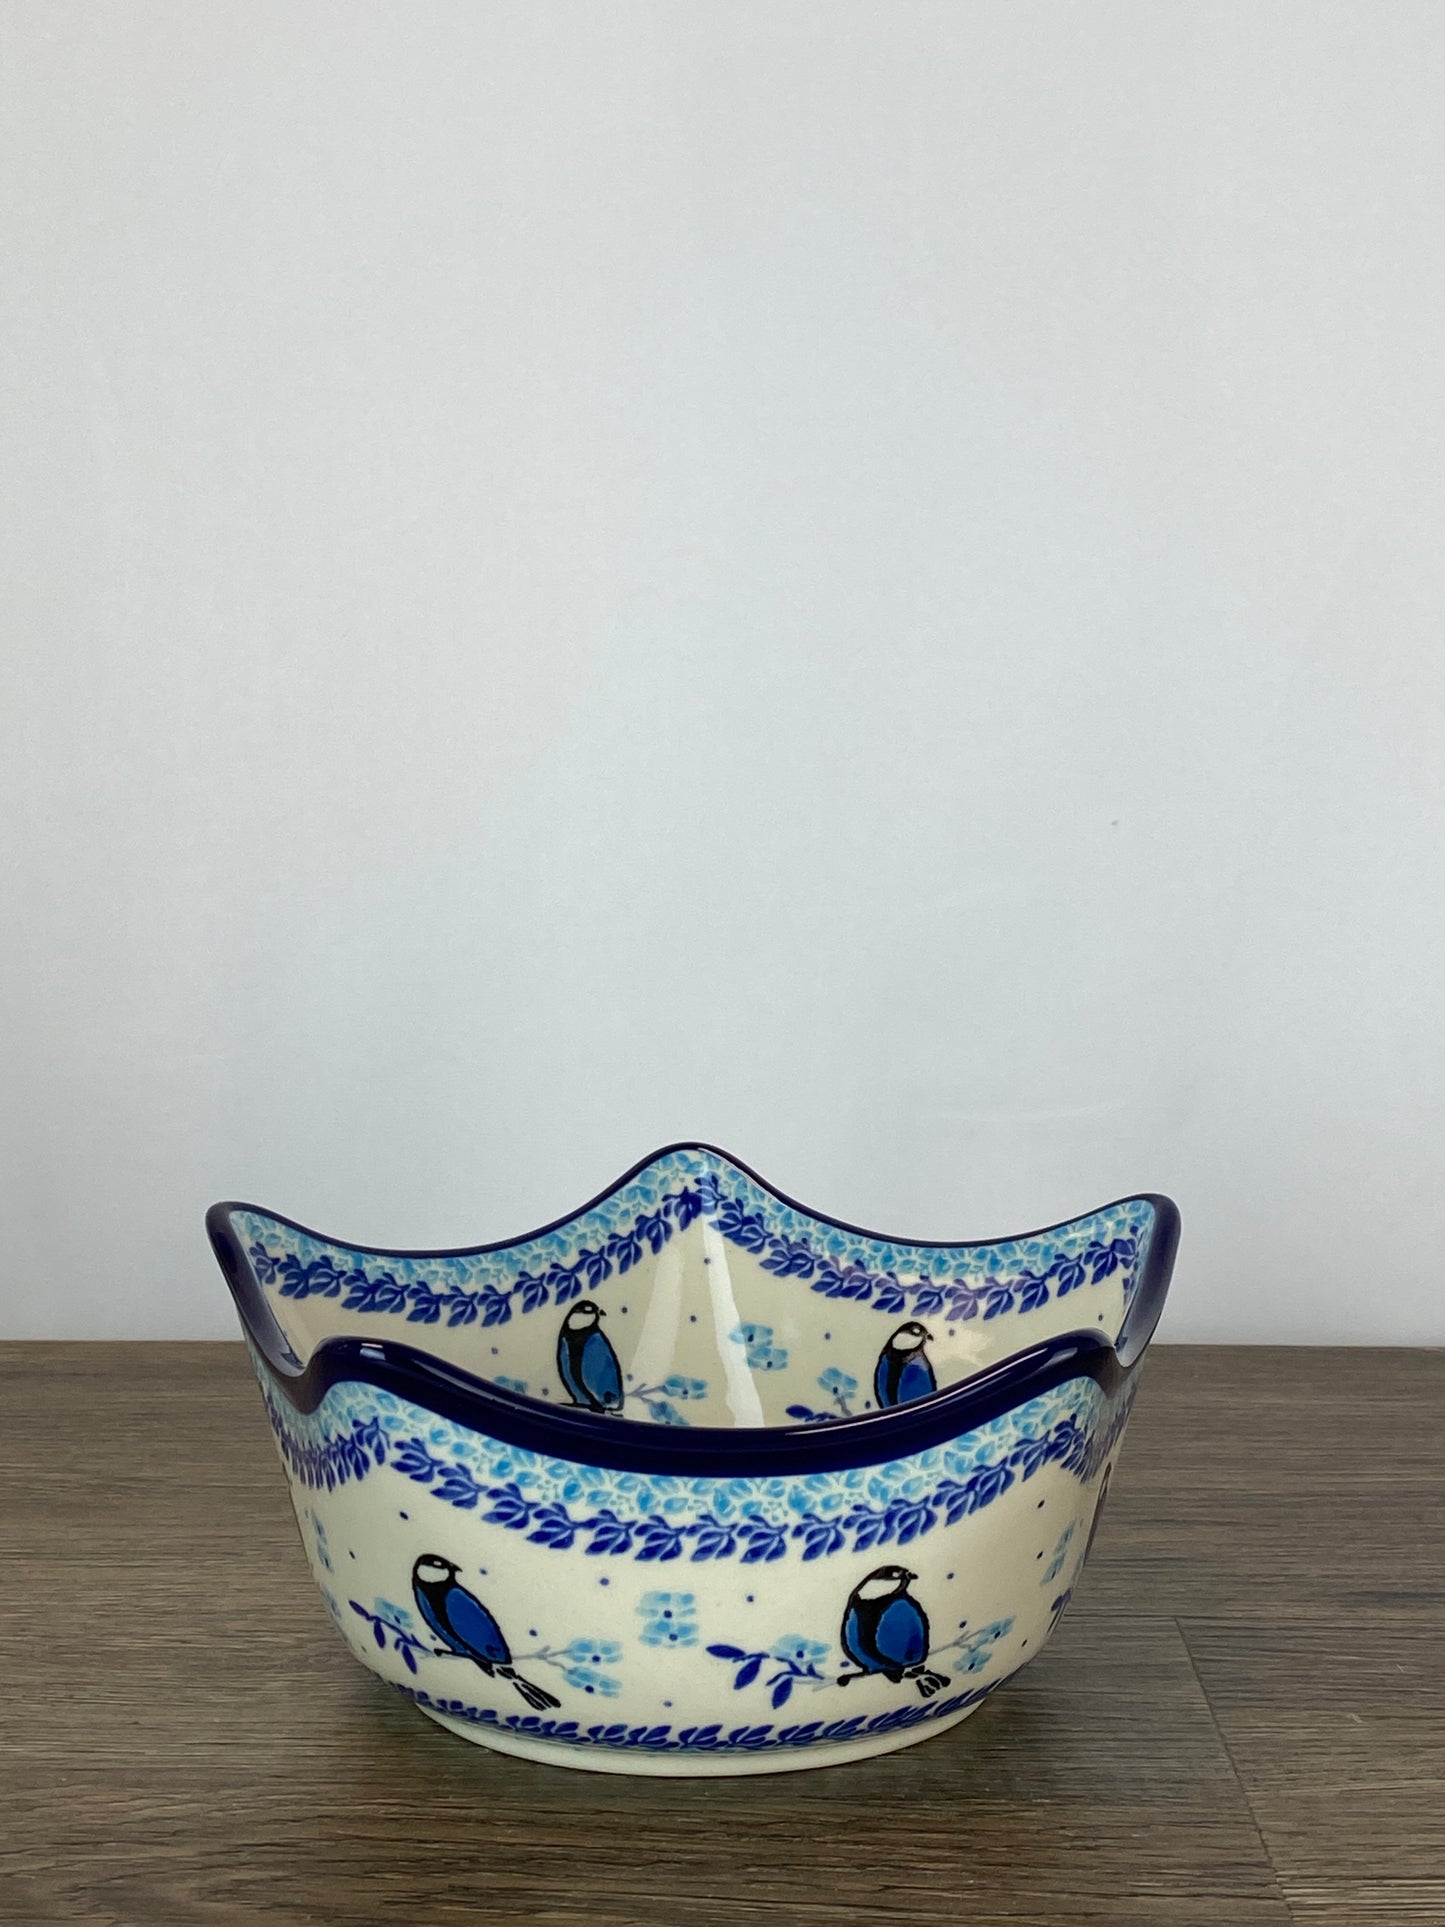 SALE Five Pointed Bowl - Shape 814 - Pattern 2679